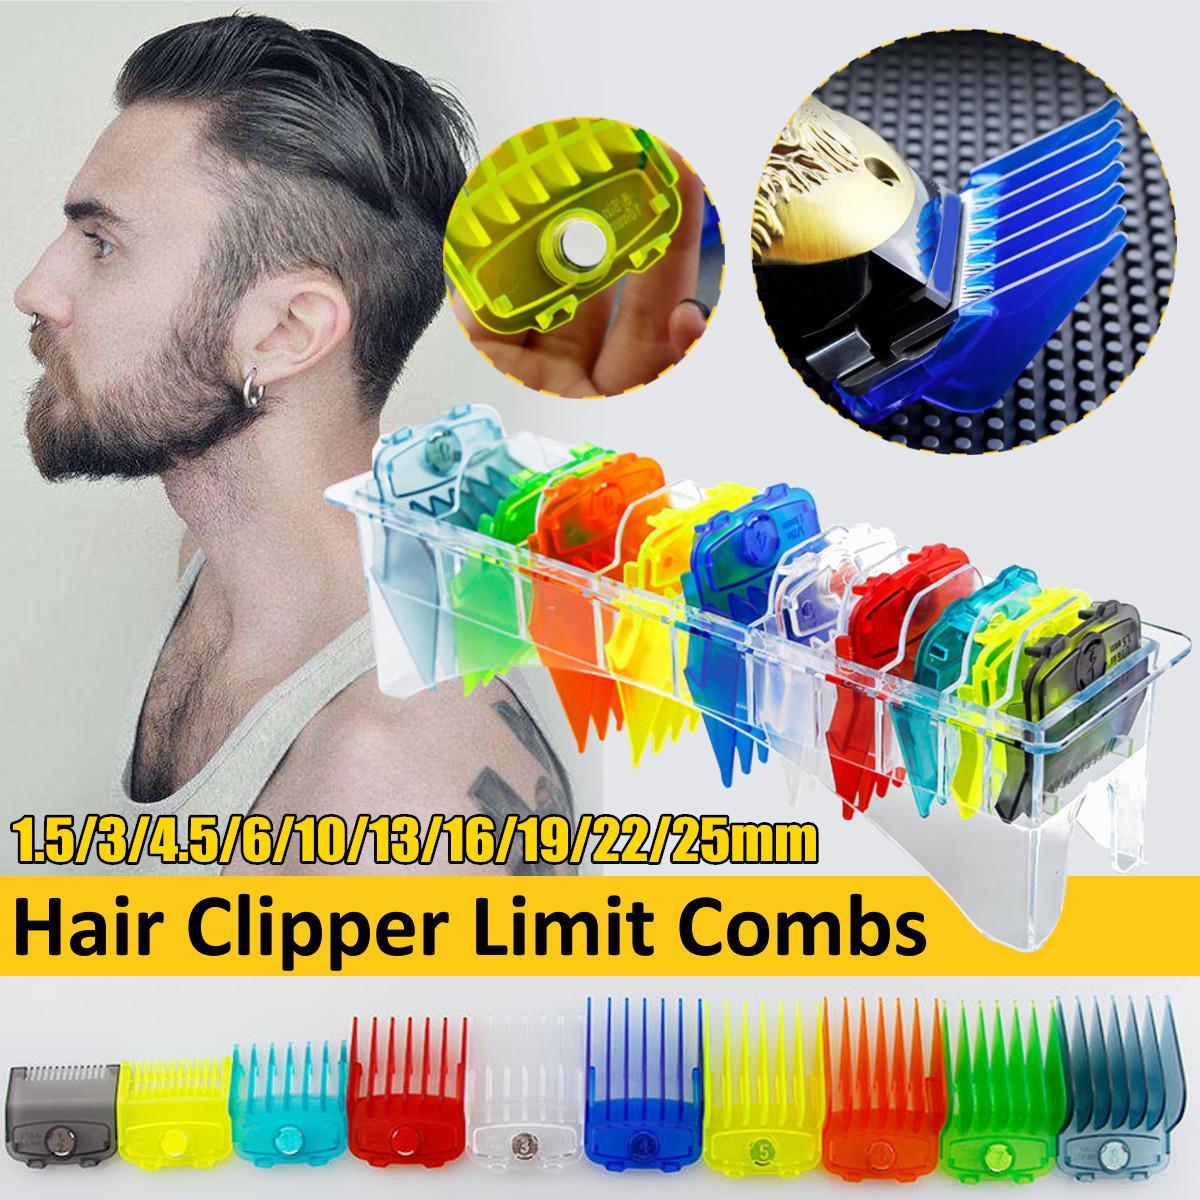 10Pcs Hair Clipper Cutting Attachment Comb Guide Limit Combs Set Replacement Tools For WAHL